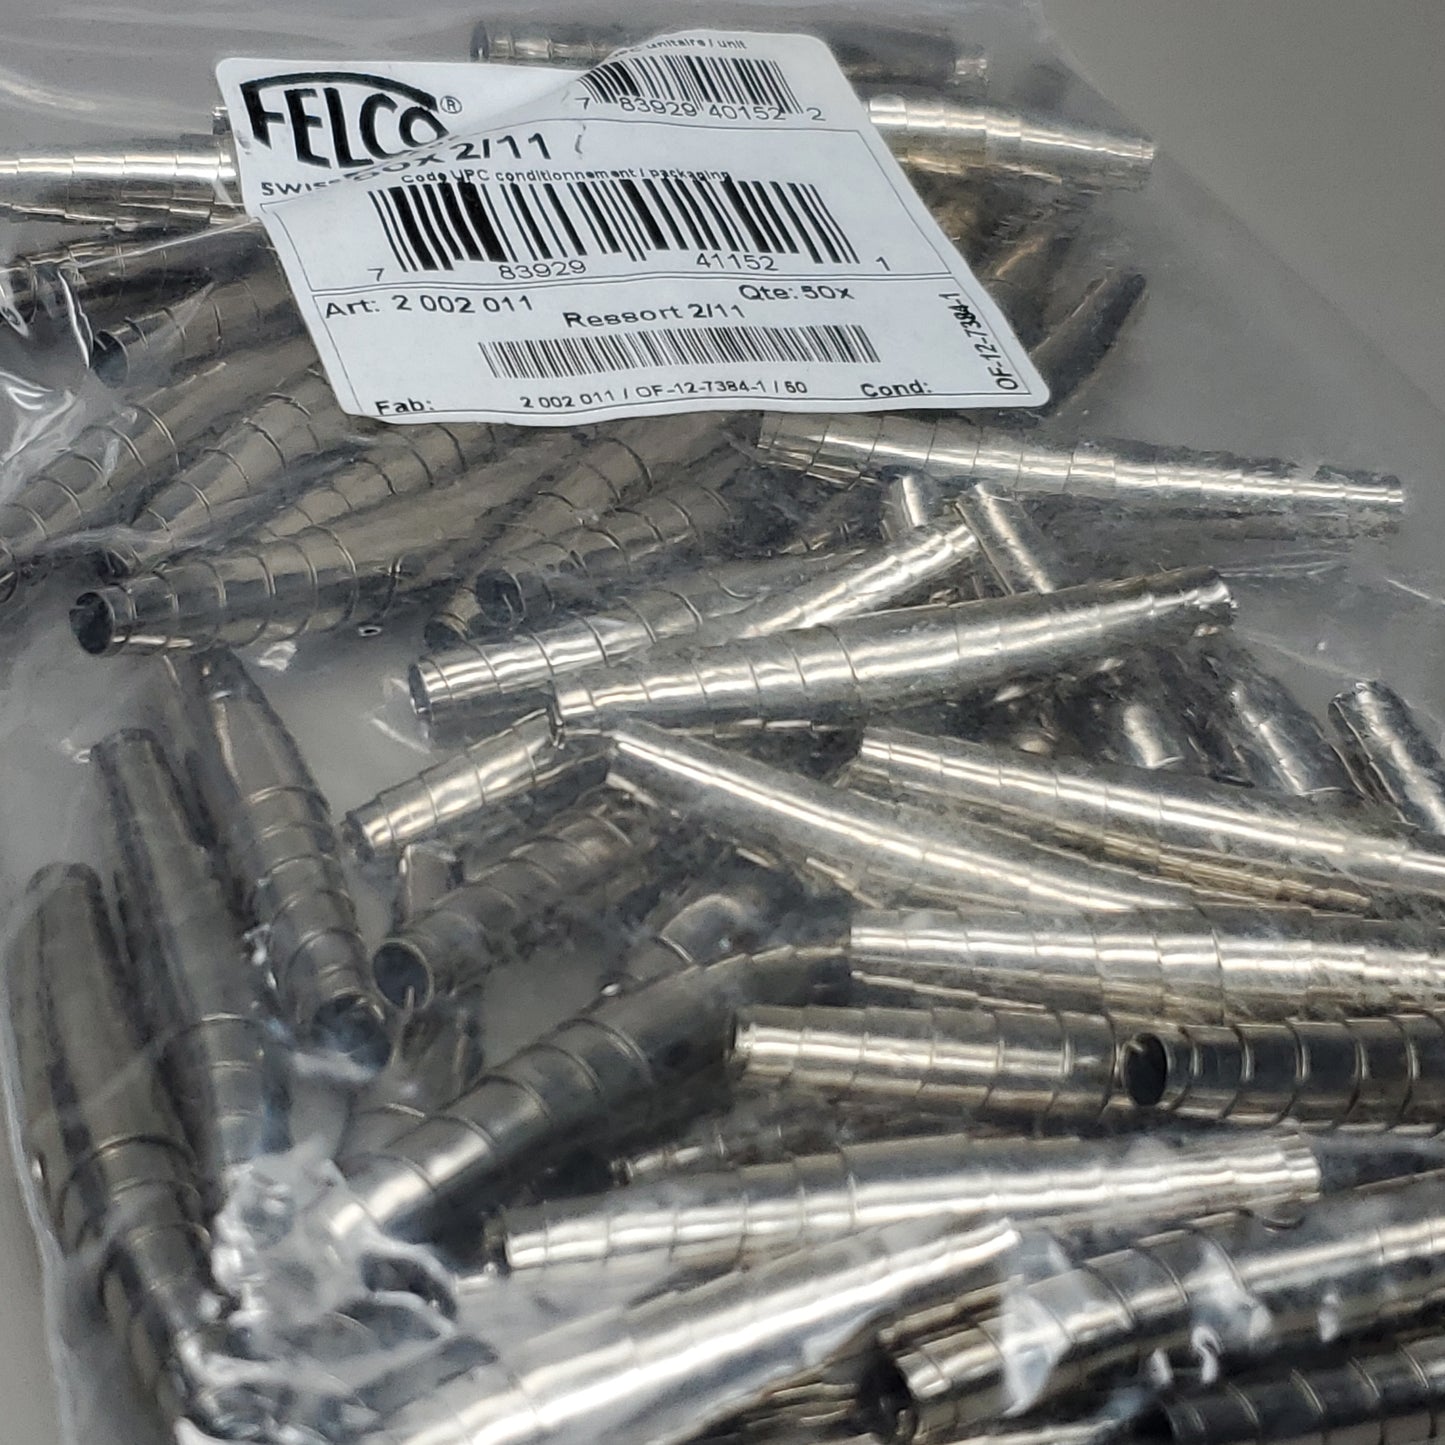 FELCO Swiss Made 50 Pack Of Pruner Replacement Springs (New)